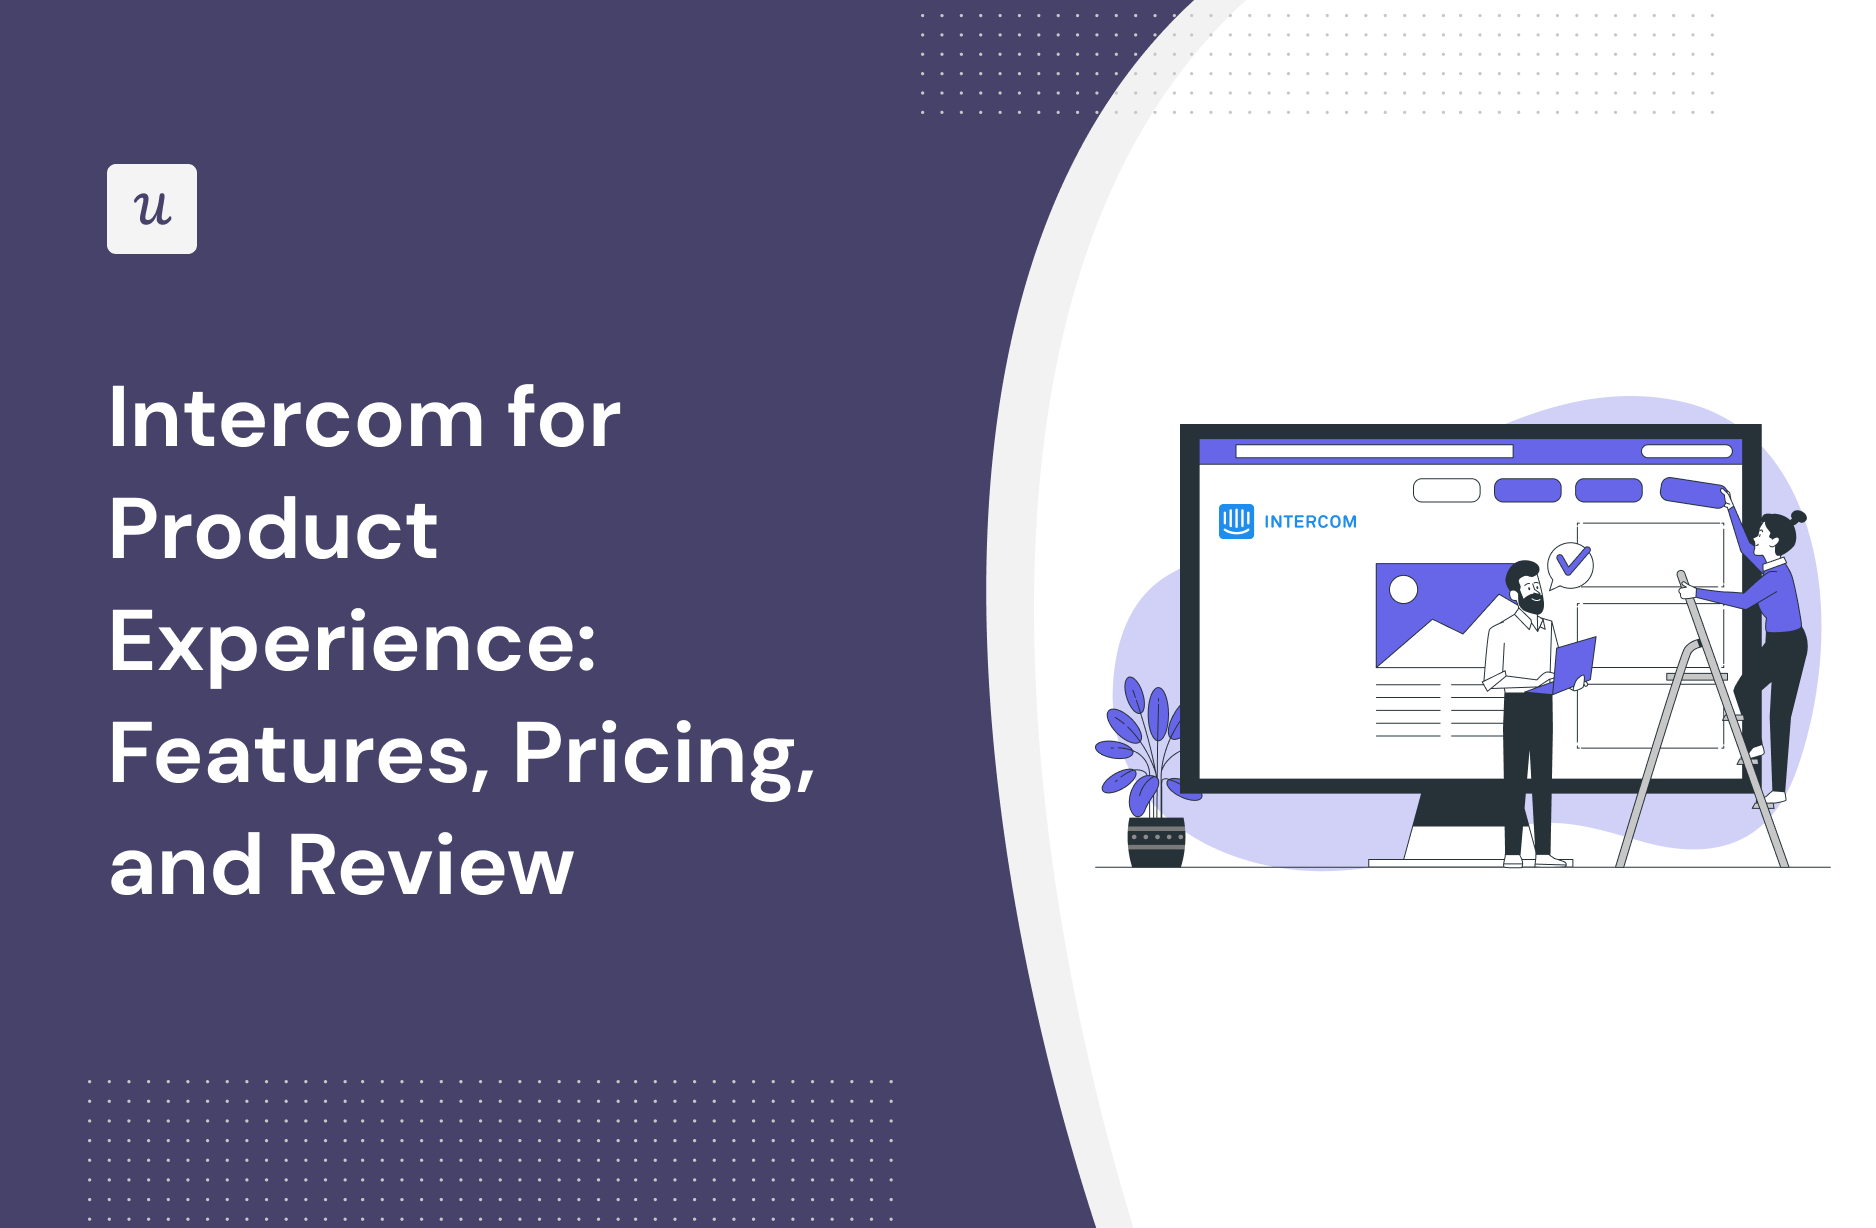 Intercom for Product Experience: Features, Pricing, and Review